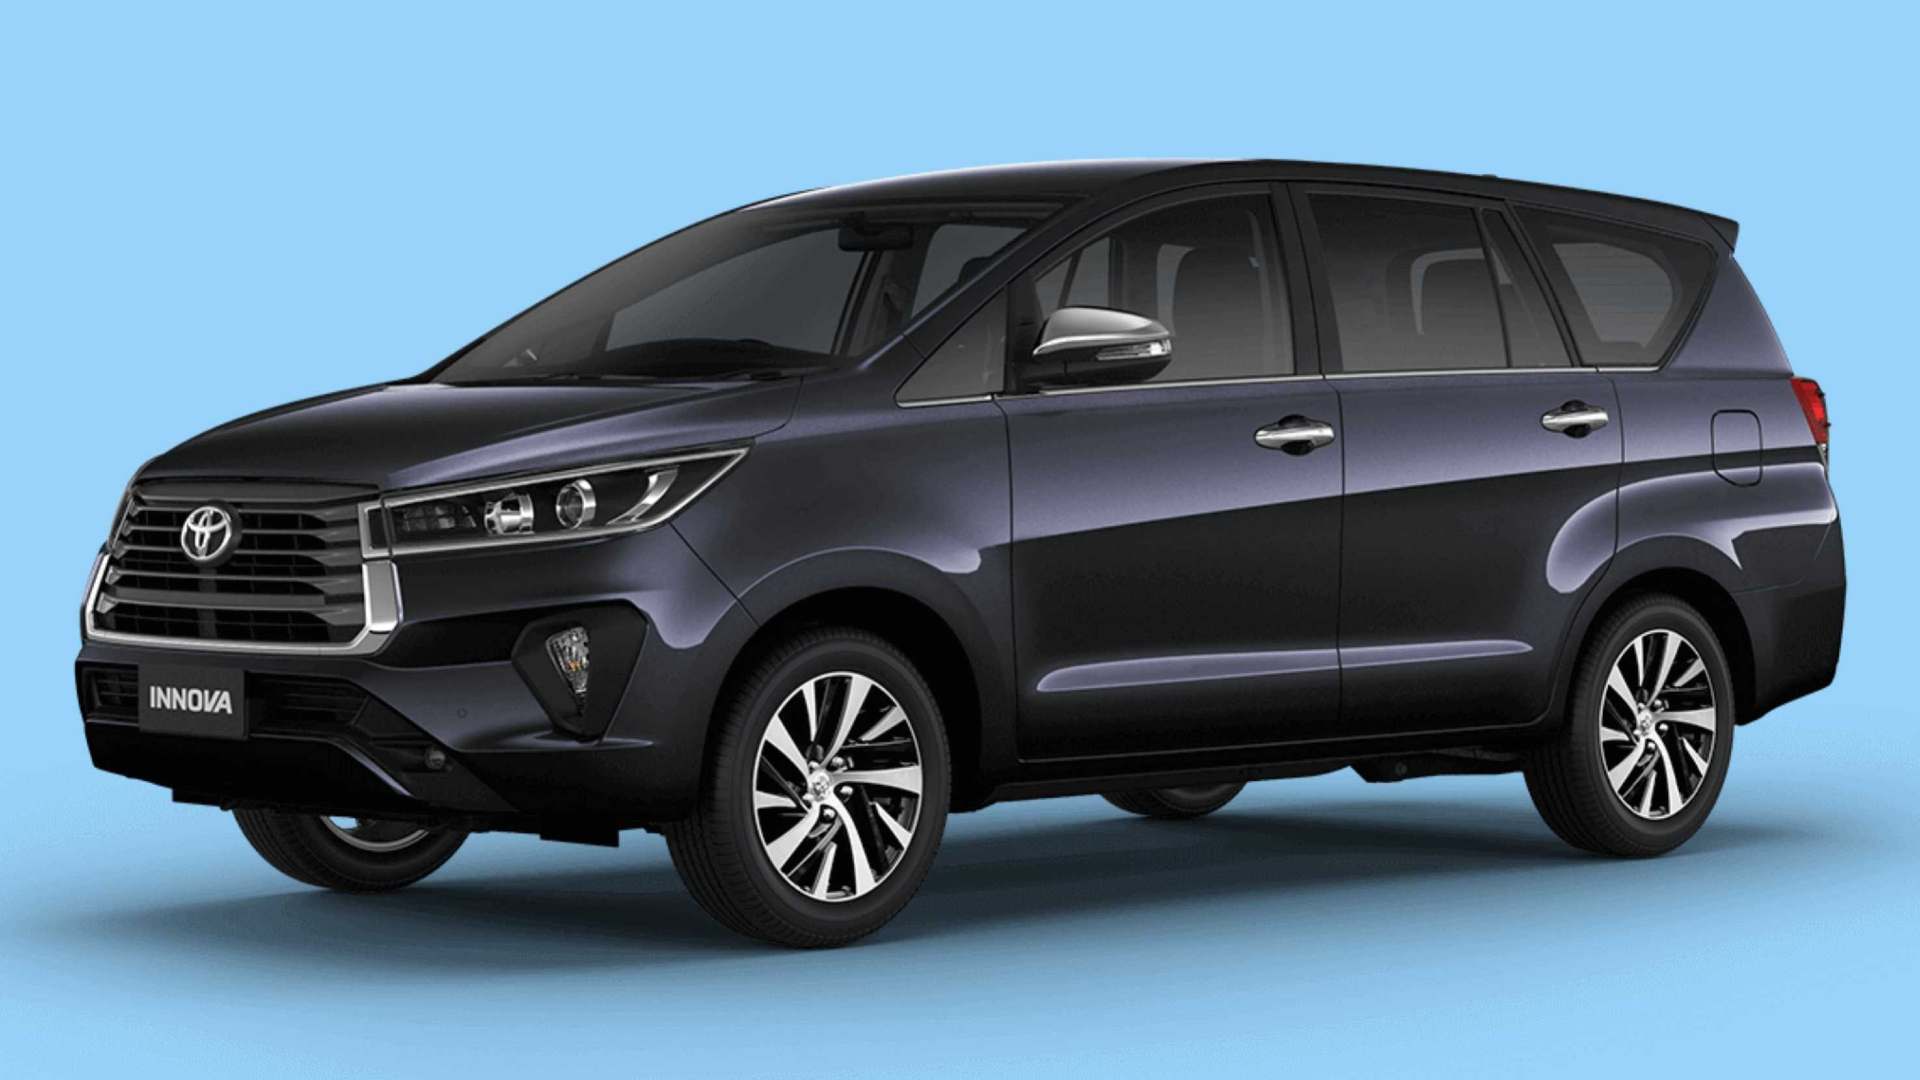 The current-gen Toyota Innova Crysta received a facelift in 2020. Image: Toyota